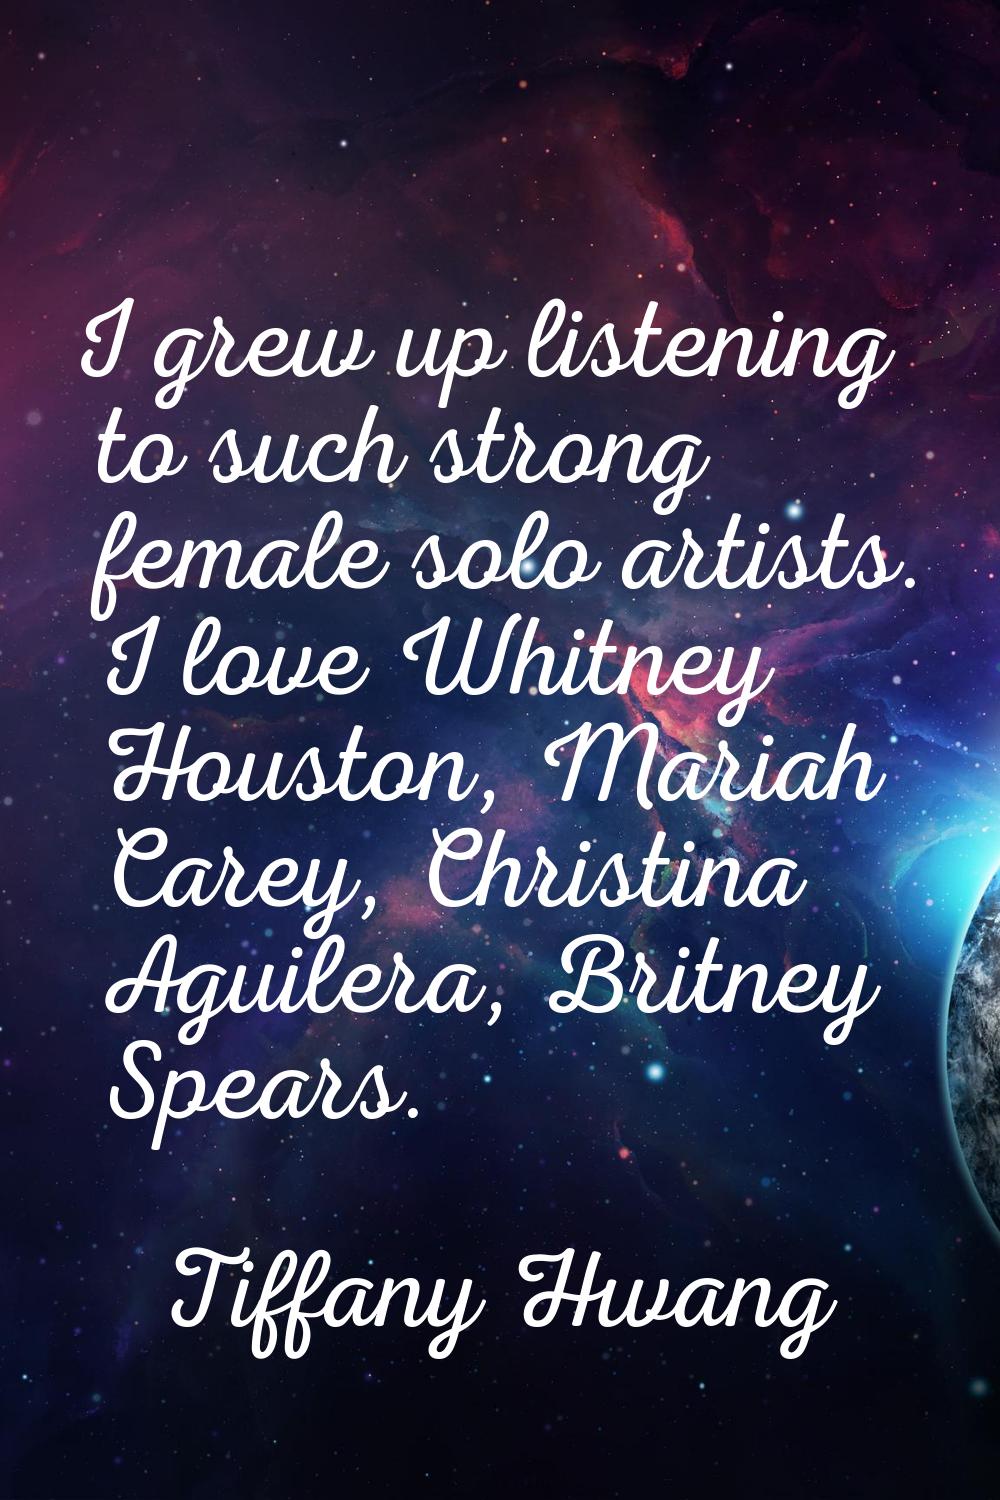 I grew up listening to such strong female solo artists. I love Whitney Houston, Mariah Carey, Chris